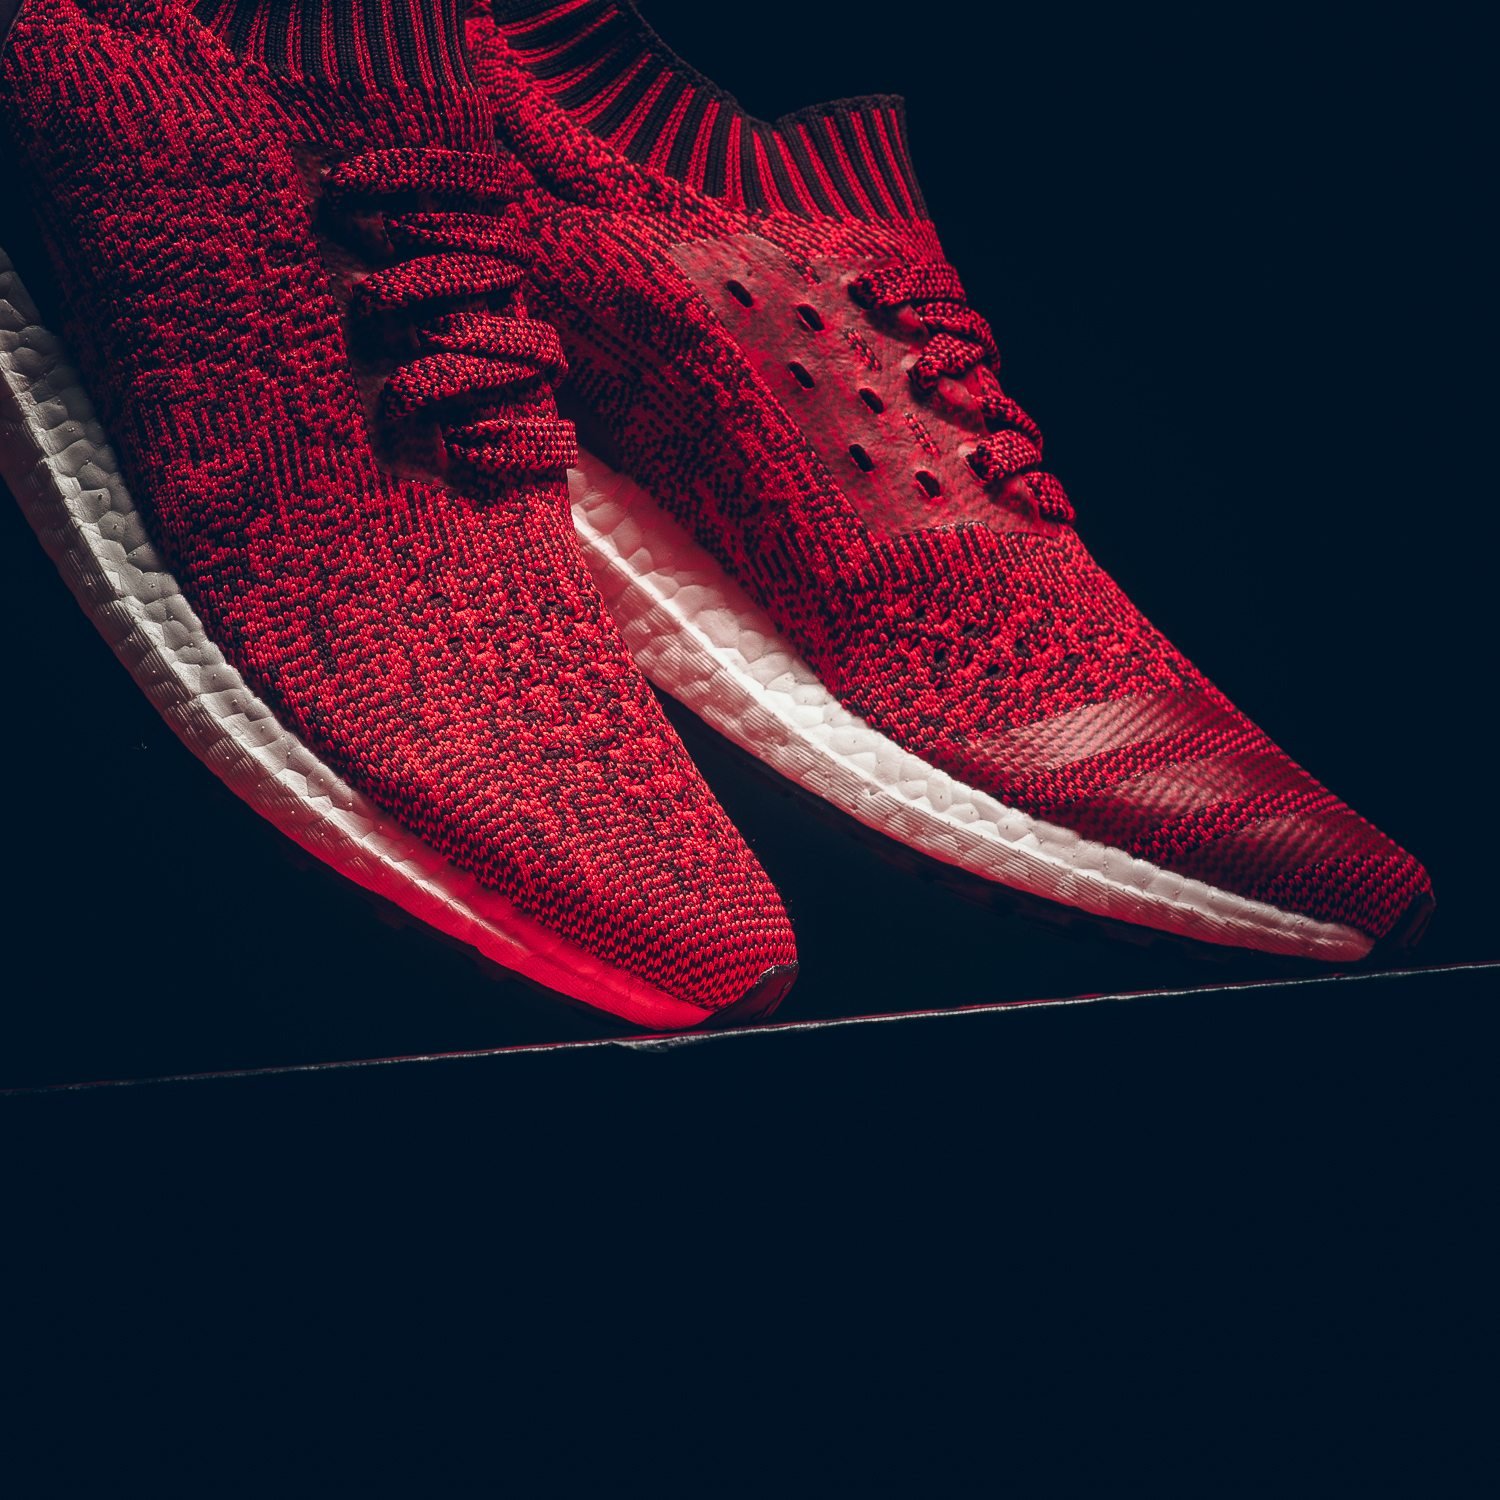 adidas Ultra Boost Uncaged "Tactile Red"